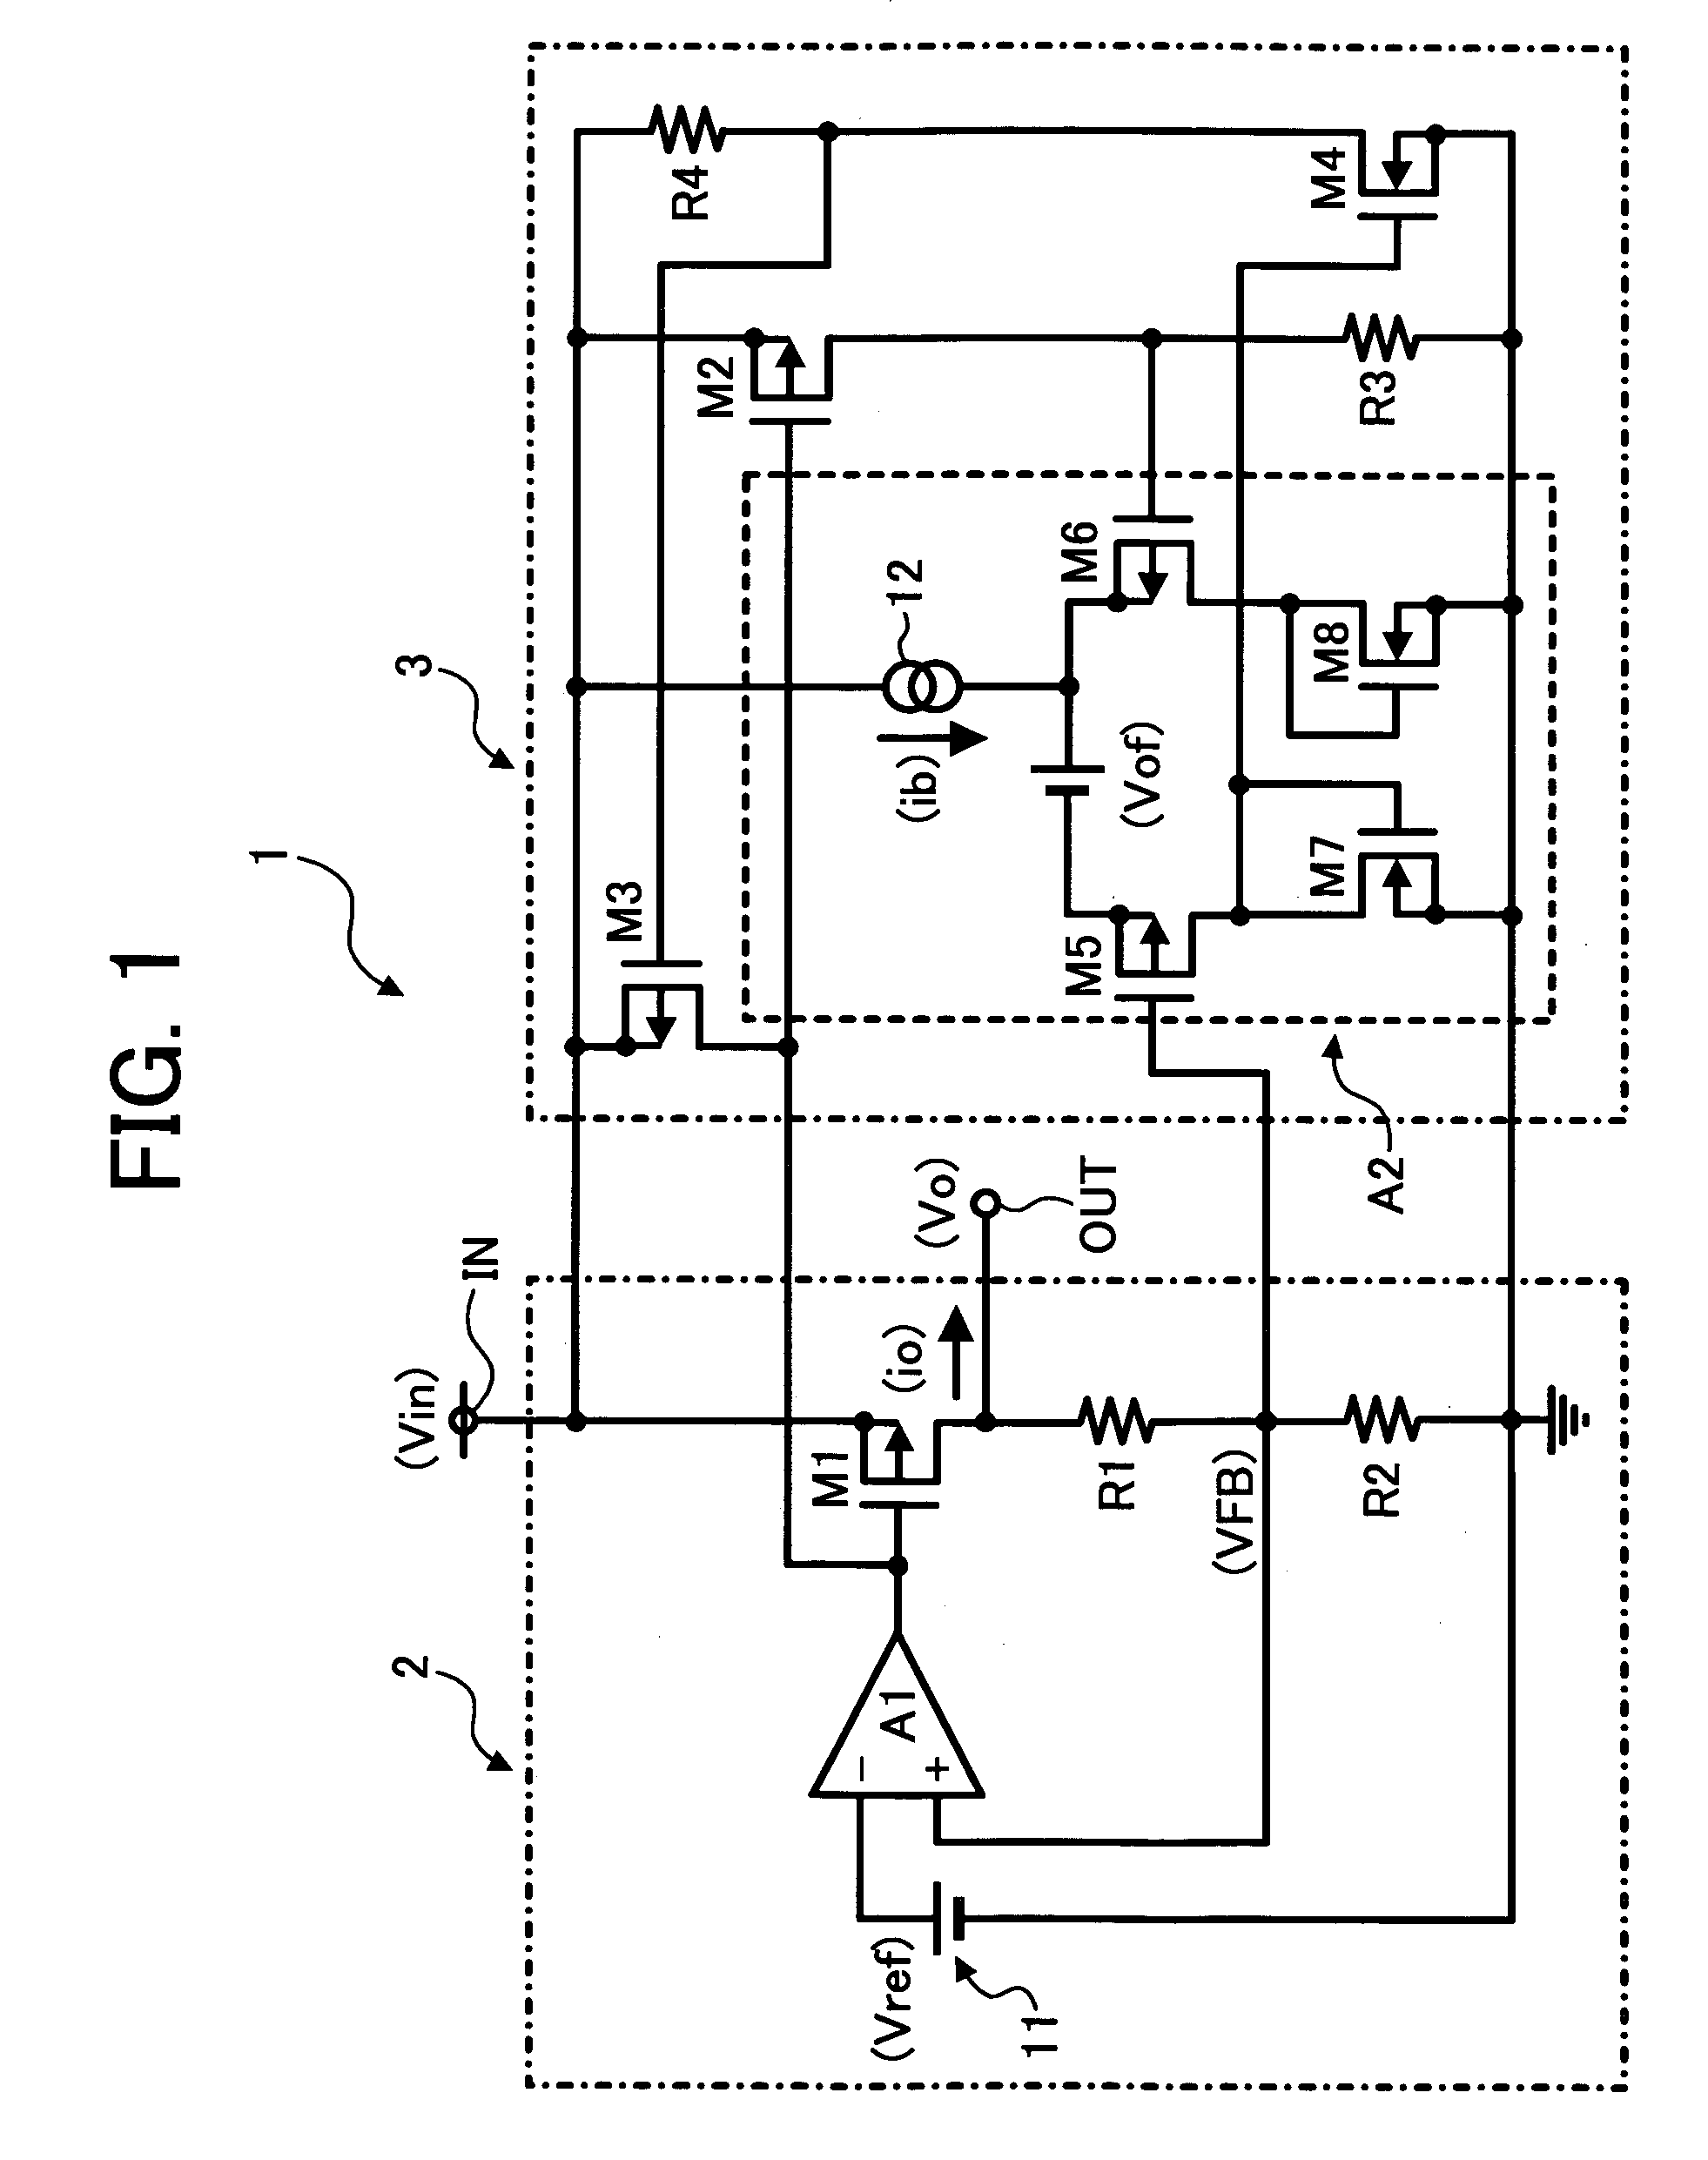 Constant-voltage power circuit with fold back current limiting capability